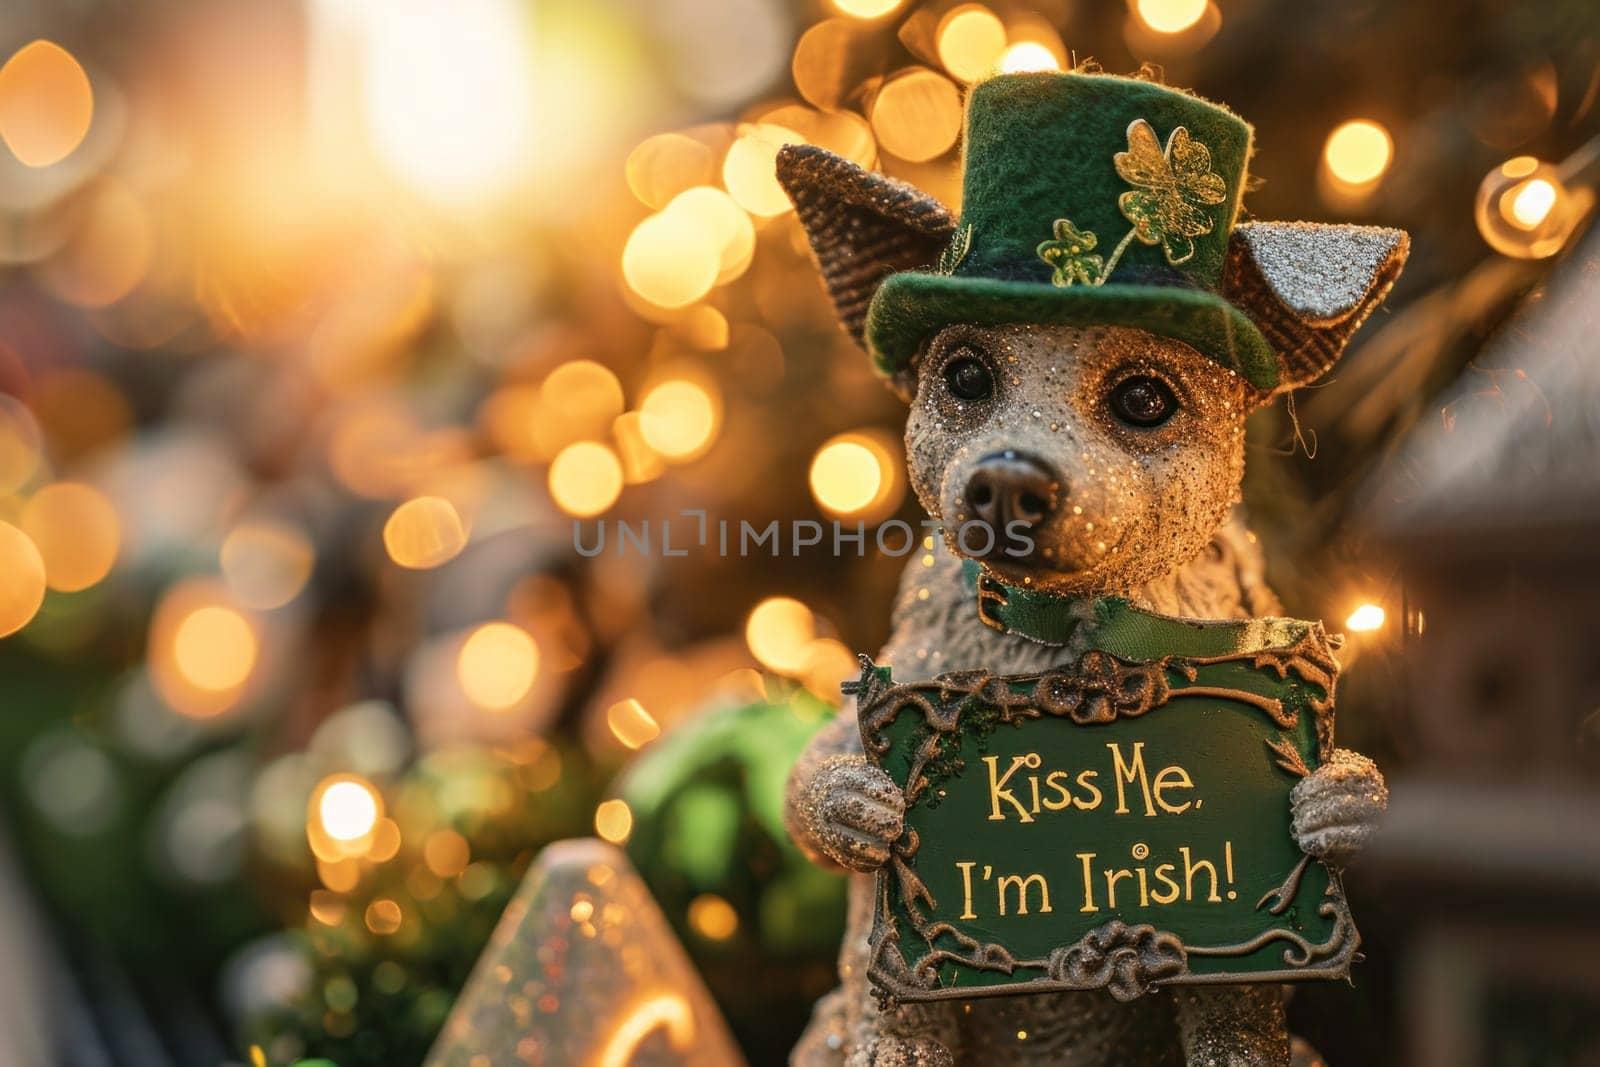 A small dog dressed in a green hat and holding up an irish sign